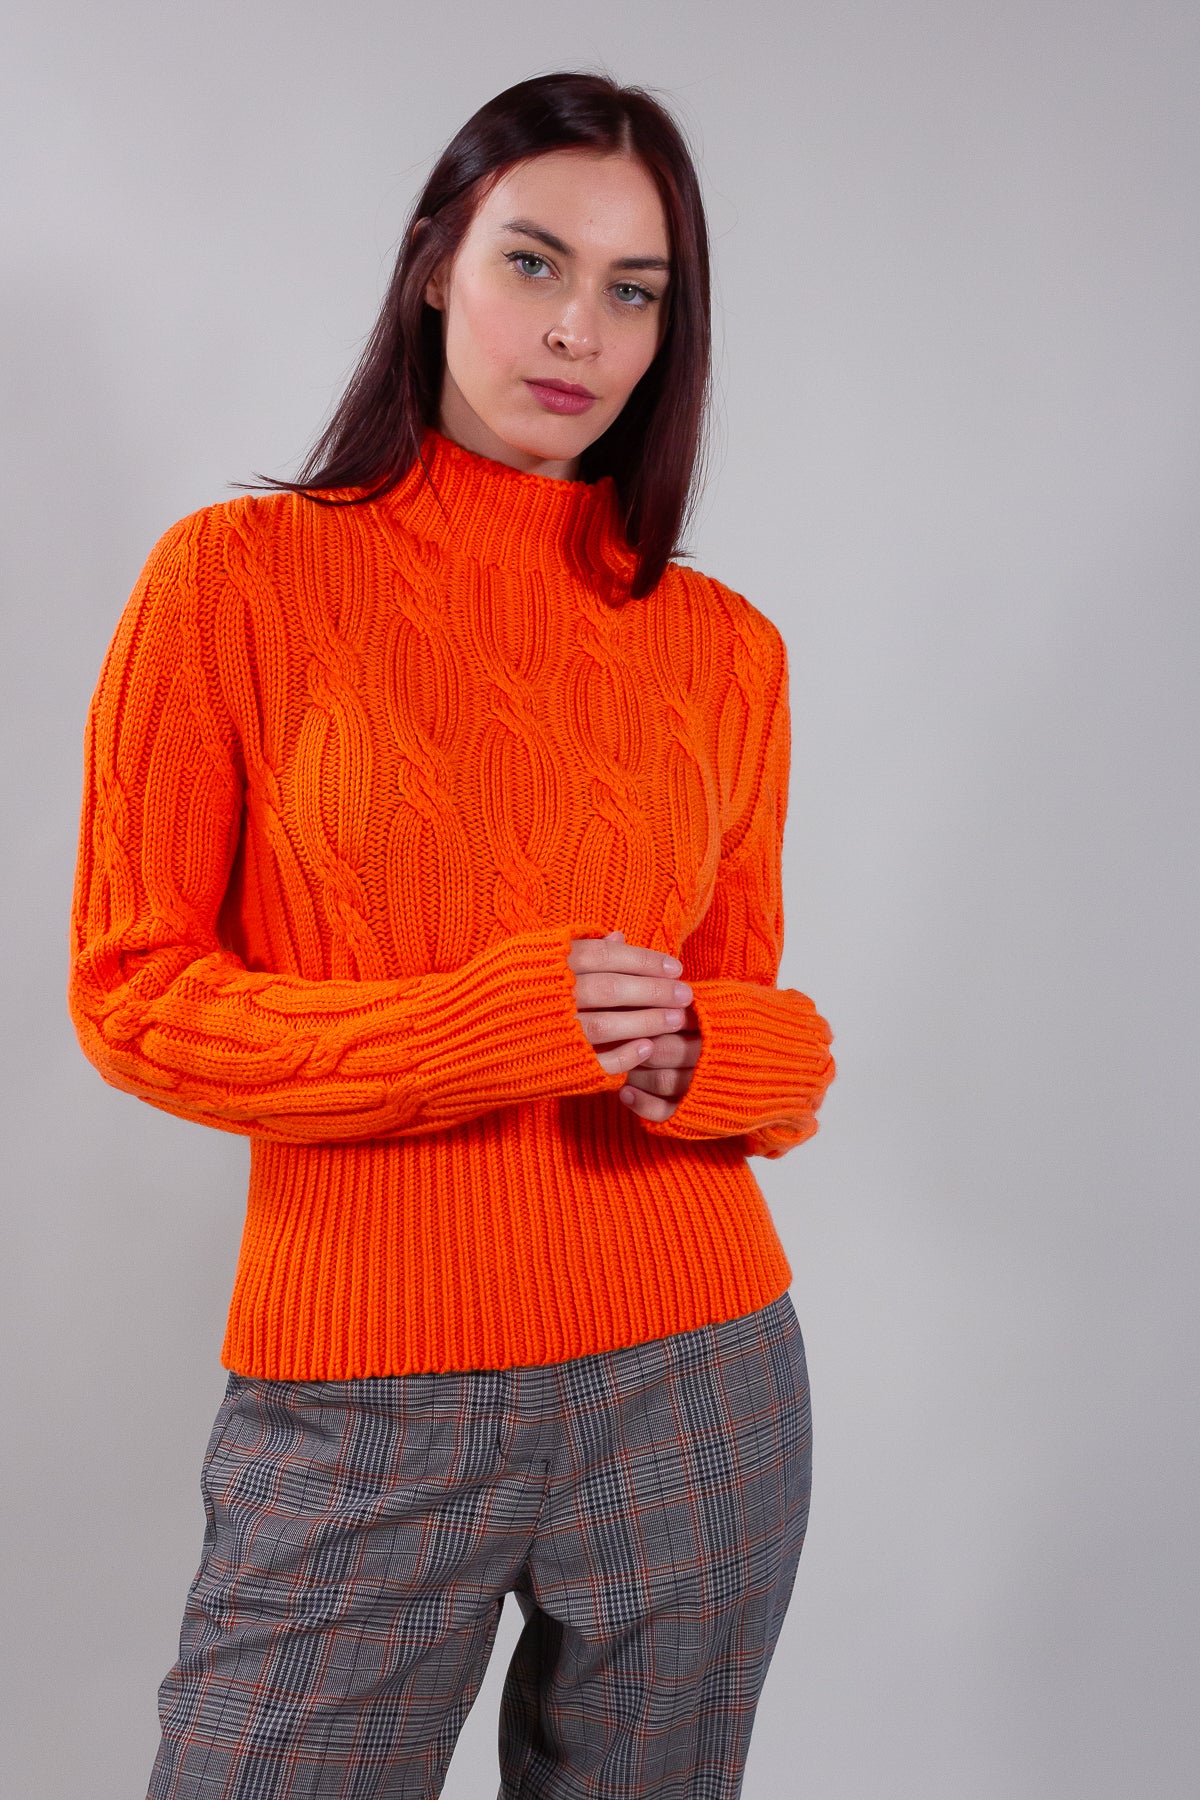 PURE WOOL CABLE TURTLENECK SWEATER